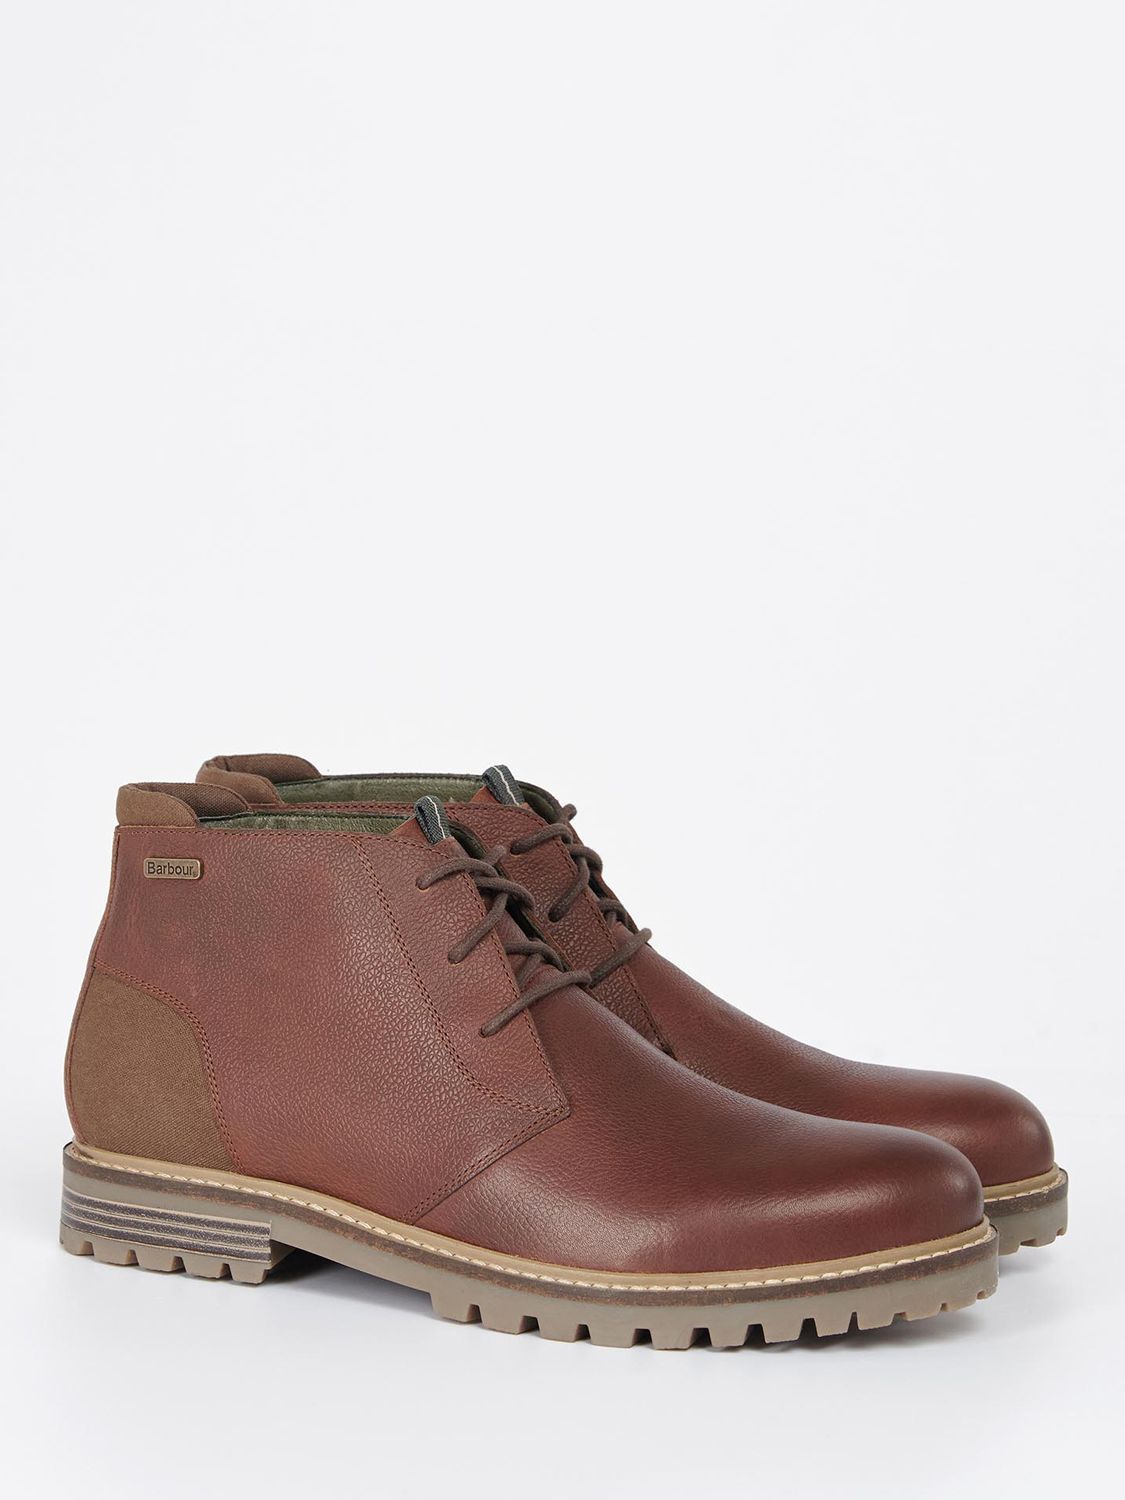 Barbour Pebble Leather Chukka Boots, Brown, Brown at John Lewis & Partners